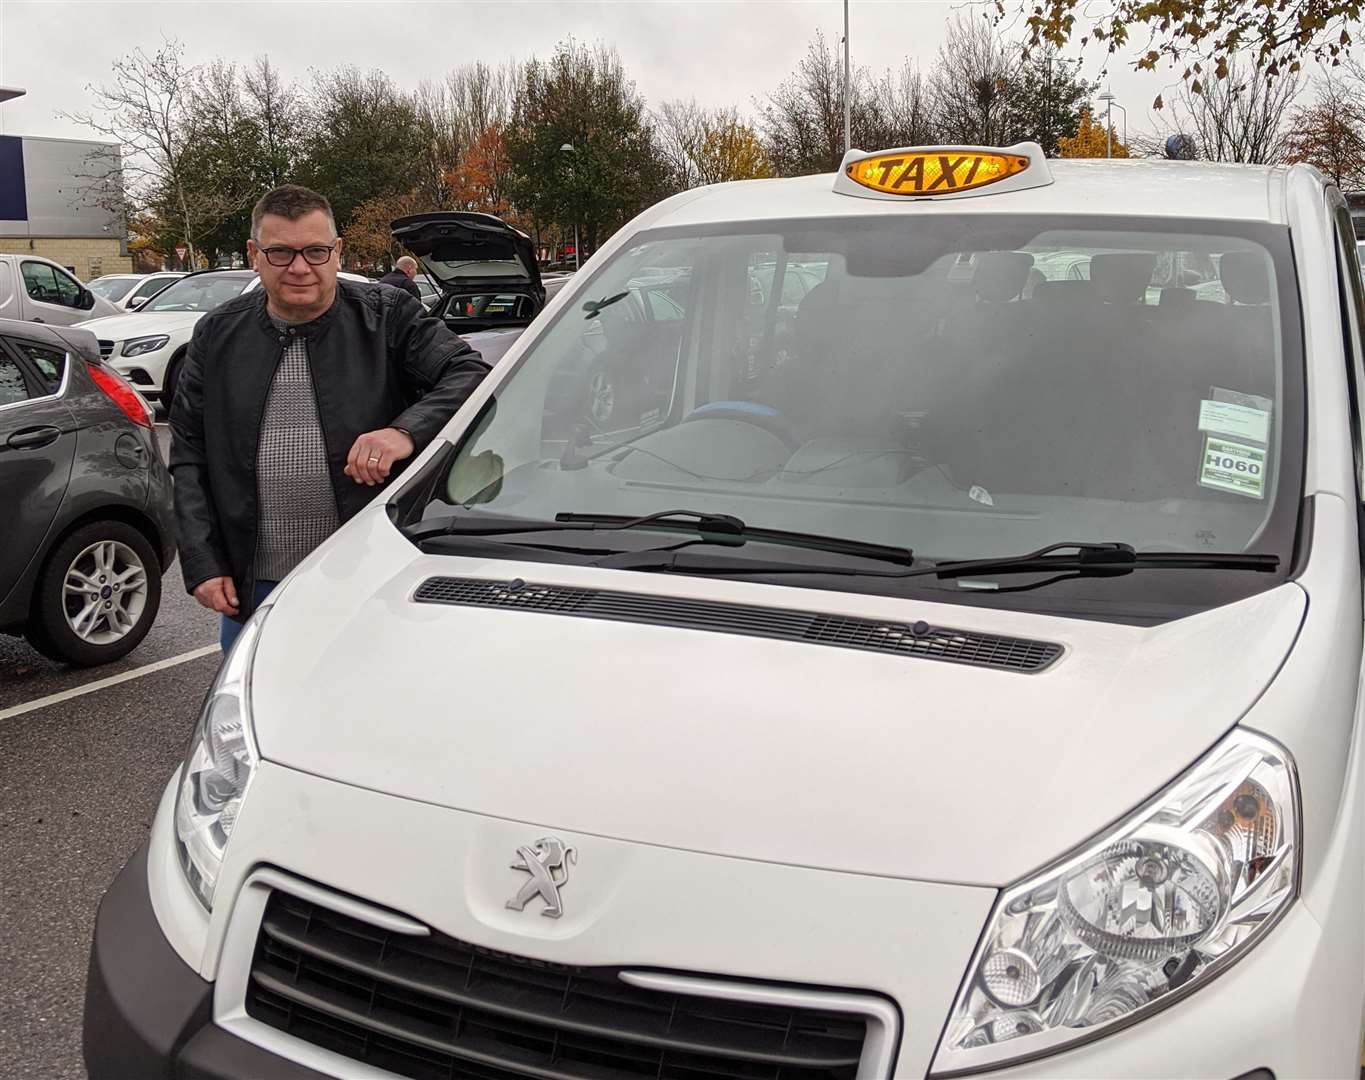 Steve Jones, a taxi driver in Dartford, is concerned the cost of the changes could impact some drivers